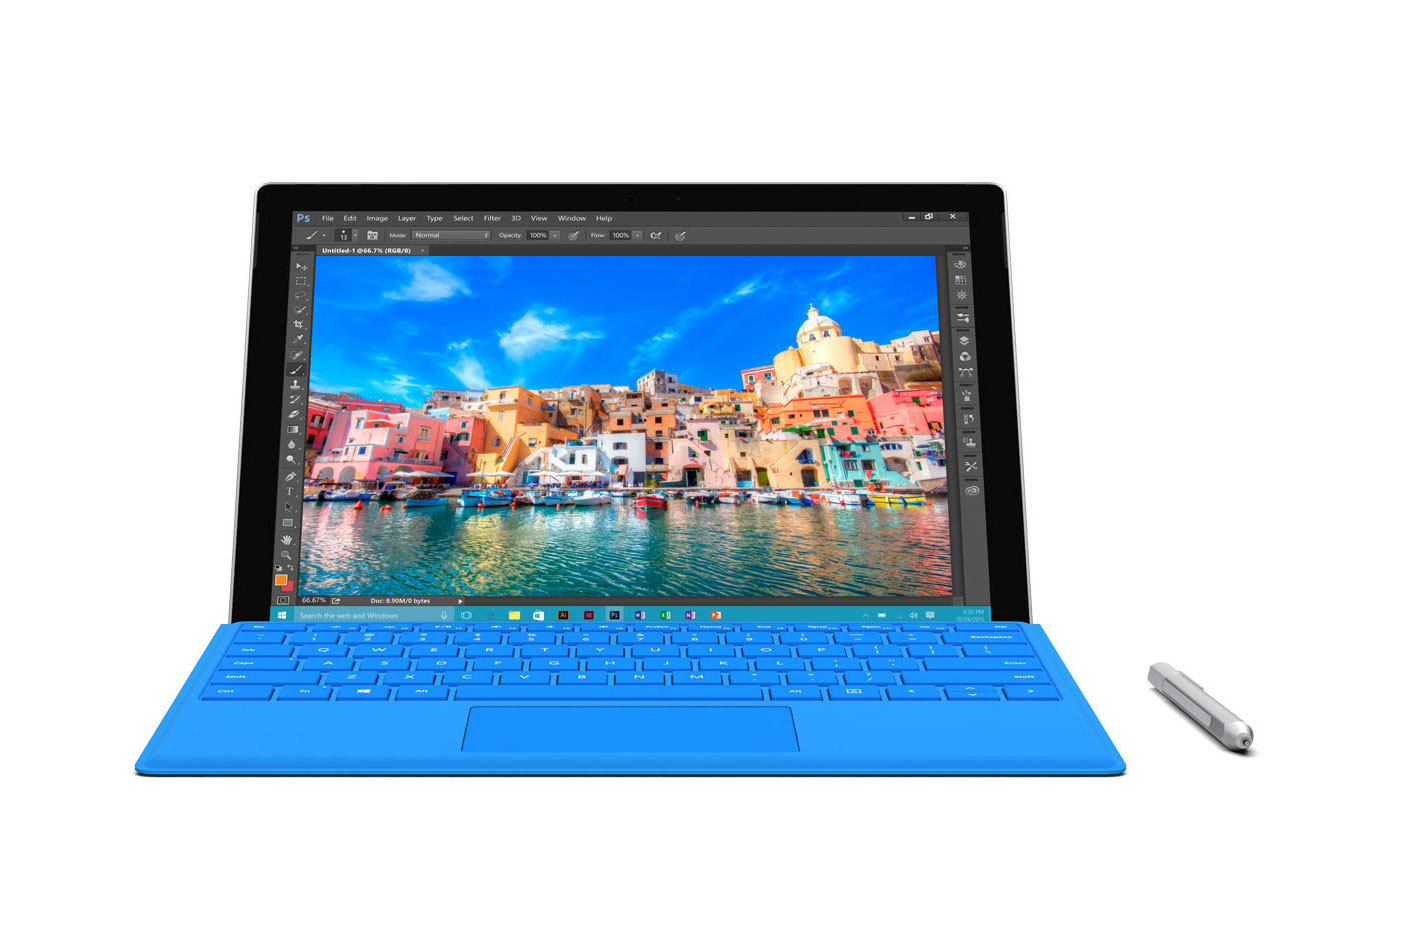 microsofts surface pro 4 rides the wave 3 started microsoft news 0027